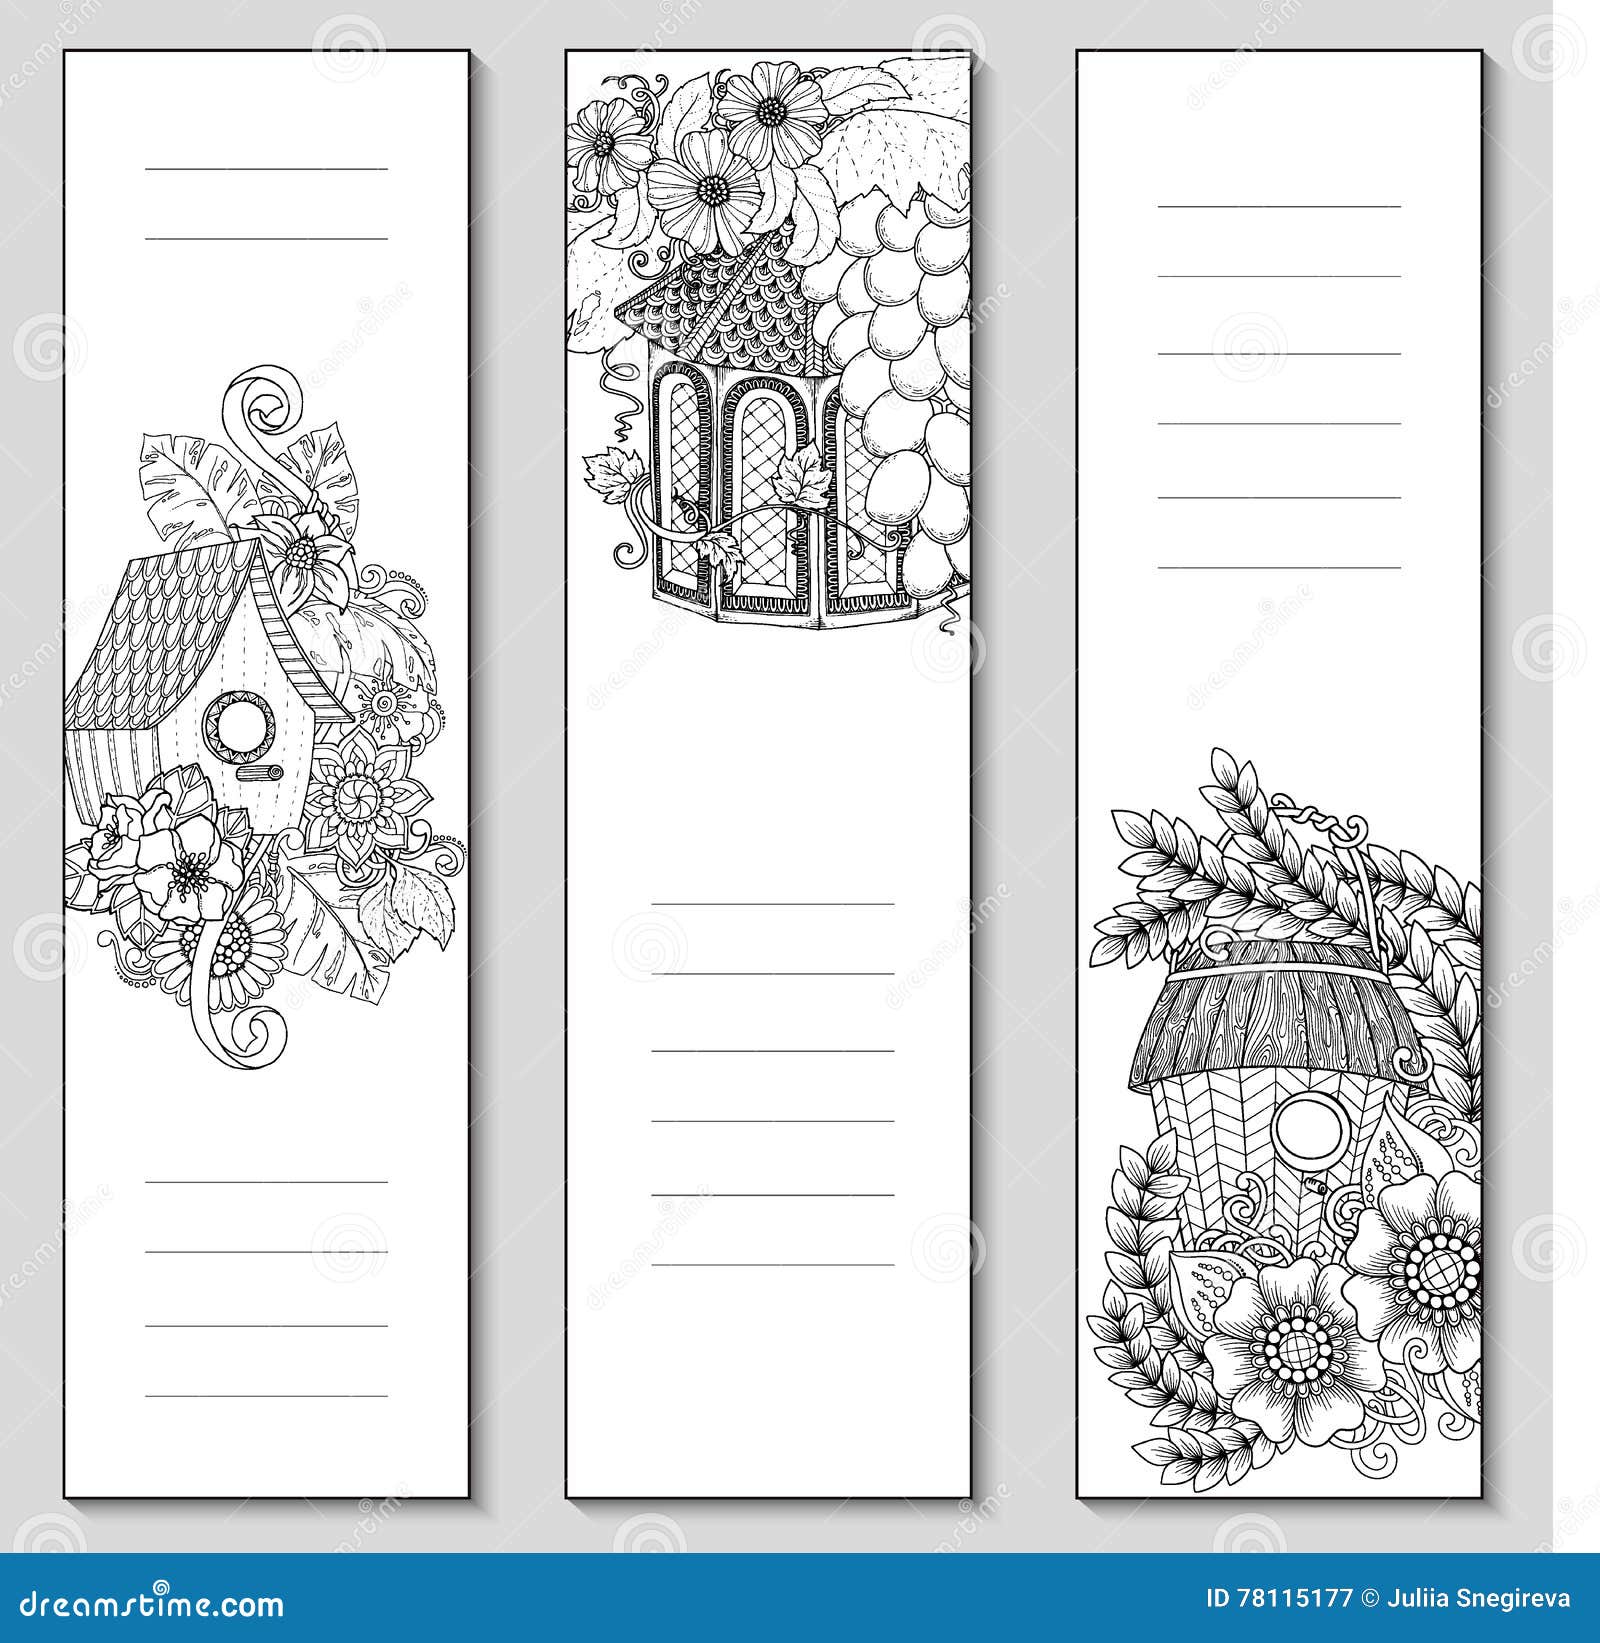 Download Template Design Bookmarks Isolated. Coloring Page Mockup ...